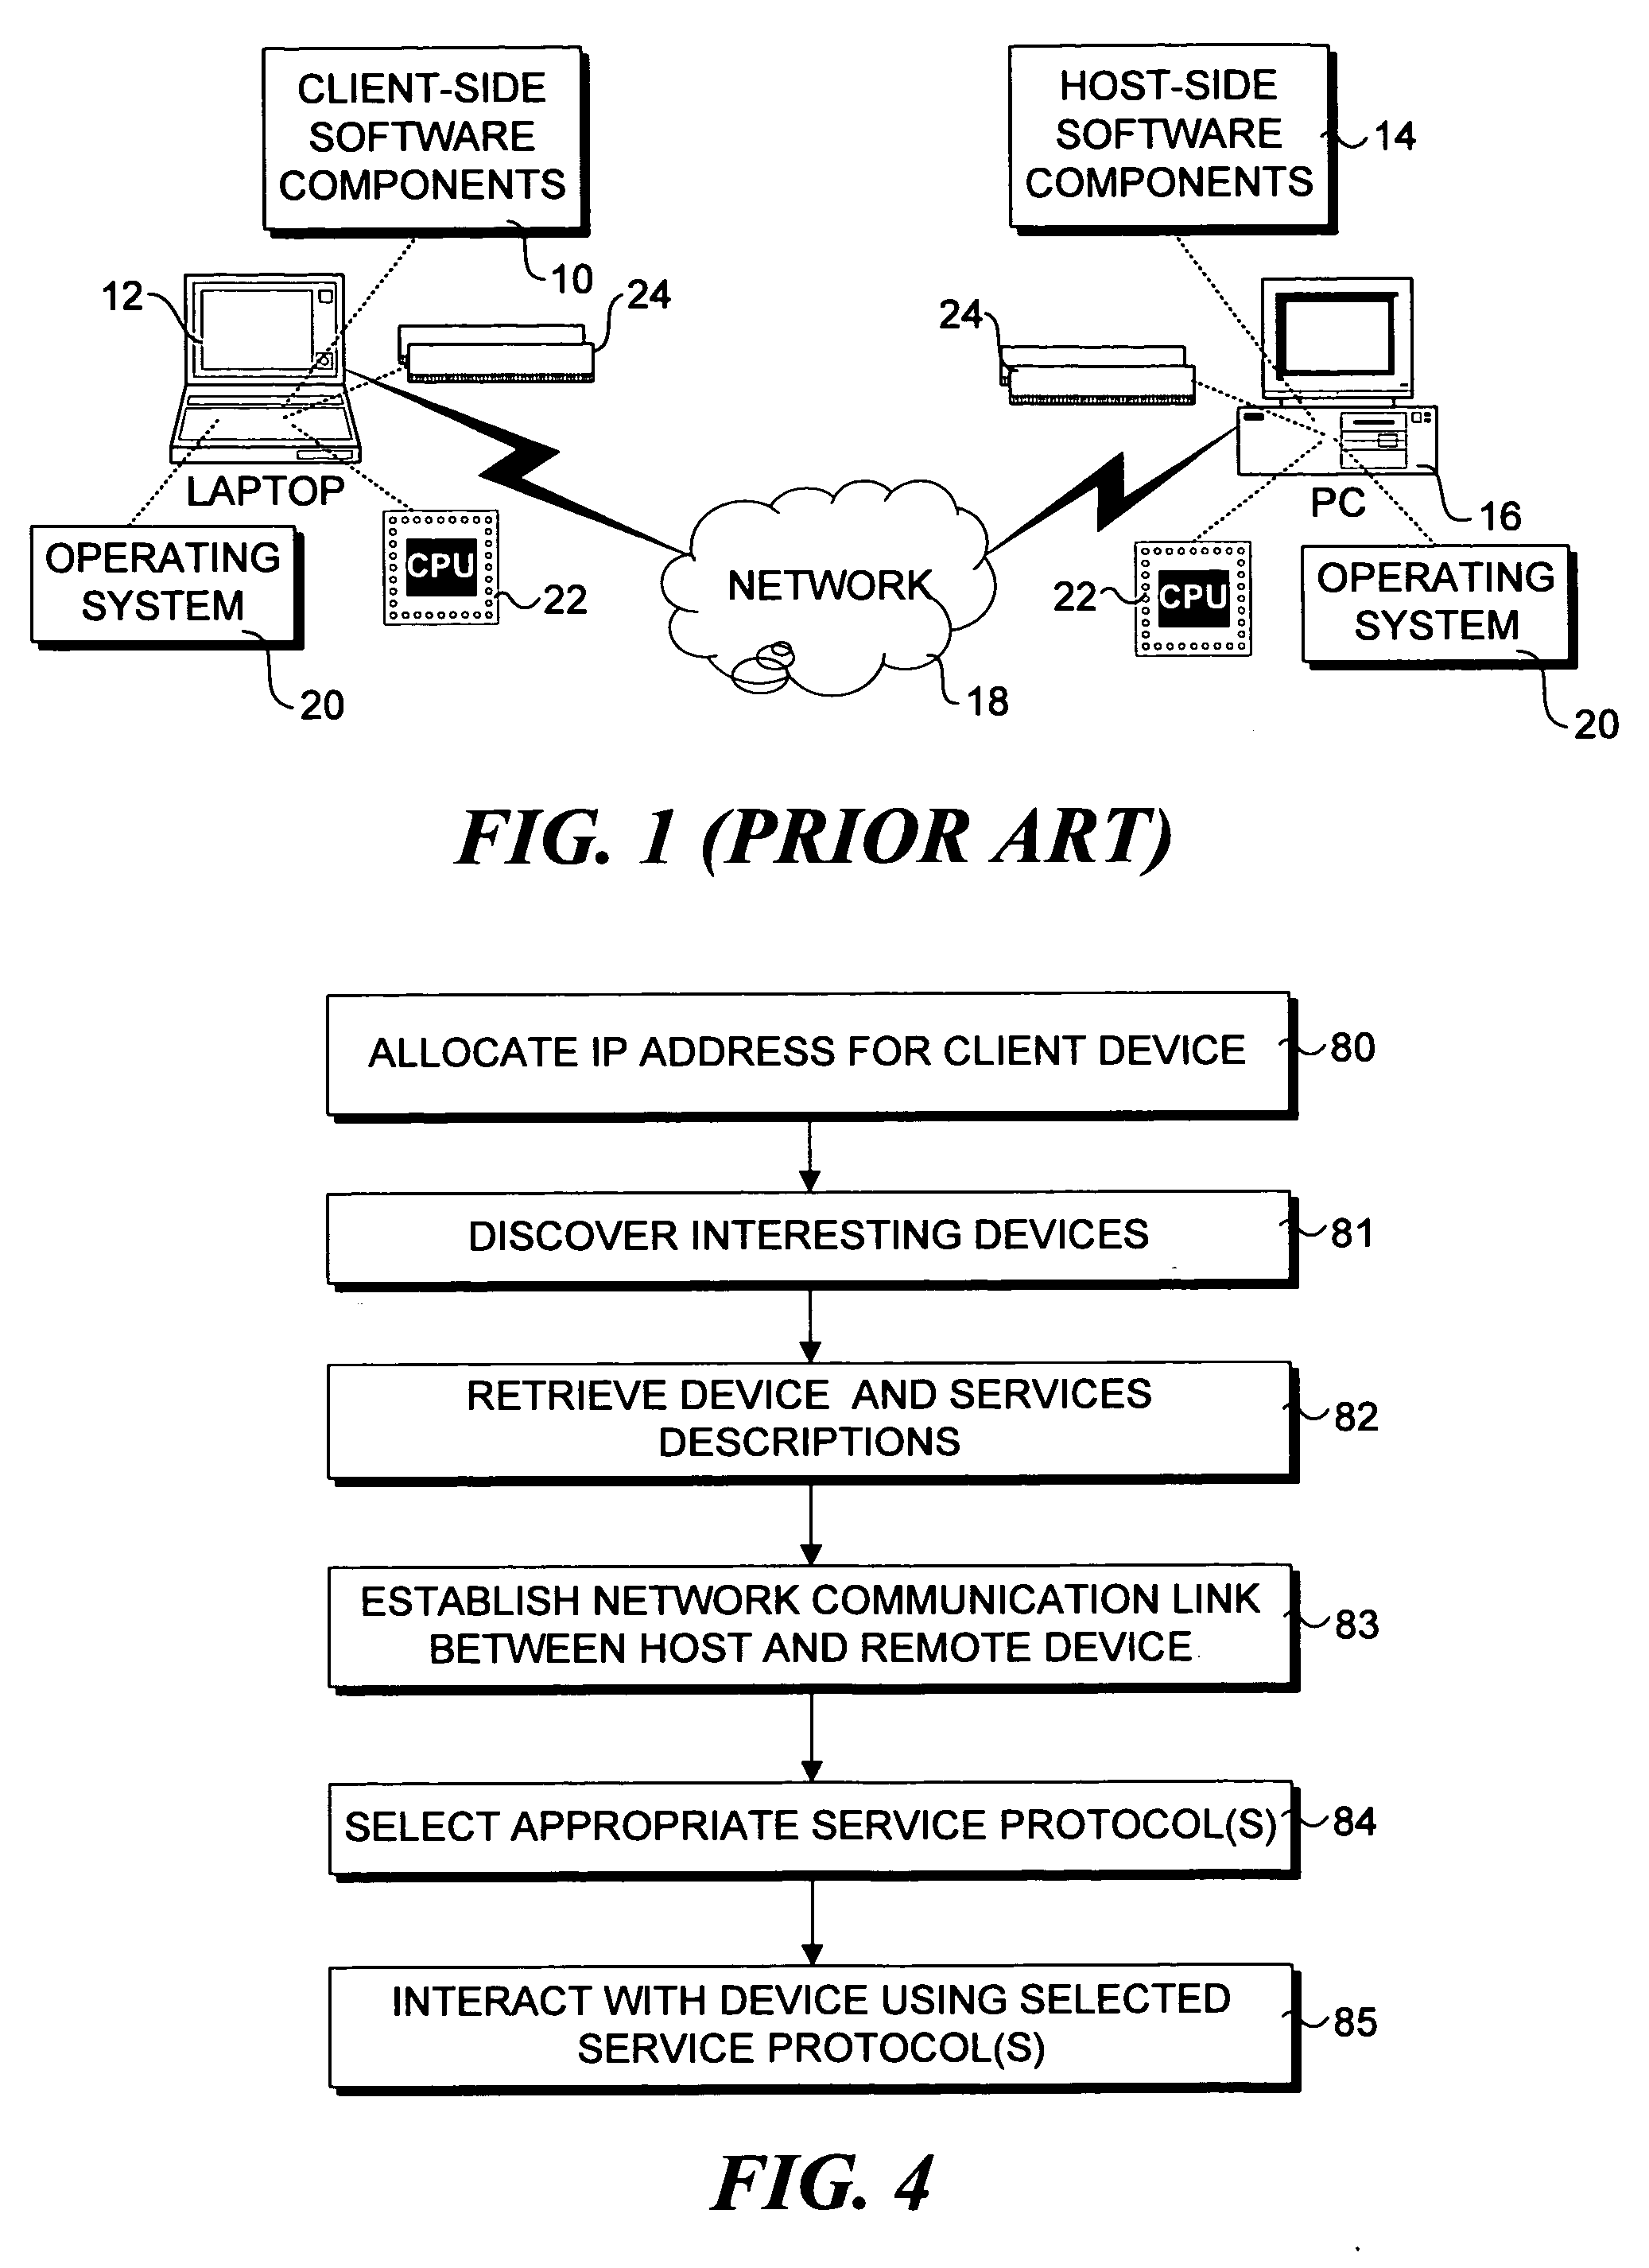 Method and architecture to support interaction between a host computer and remote devices